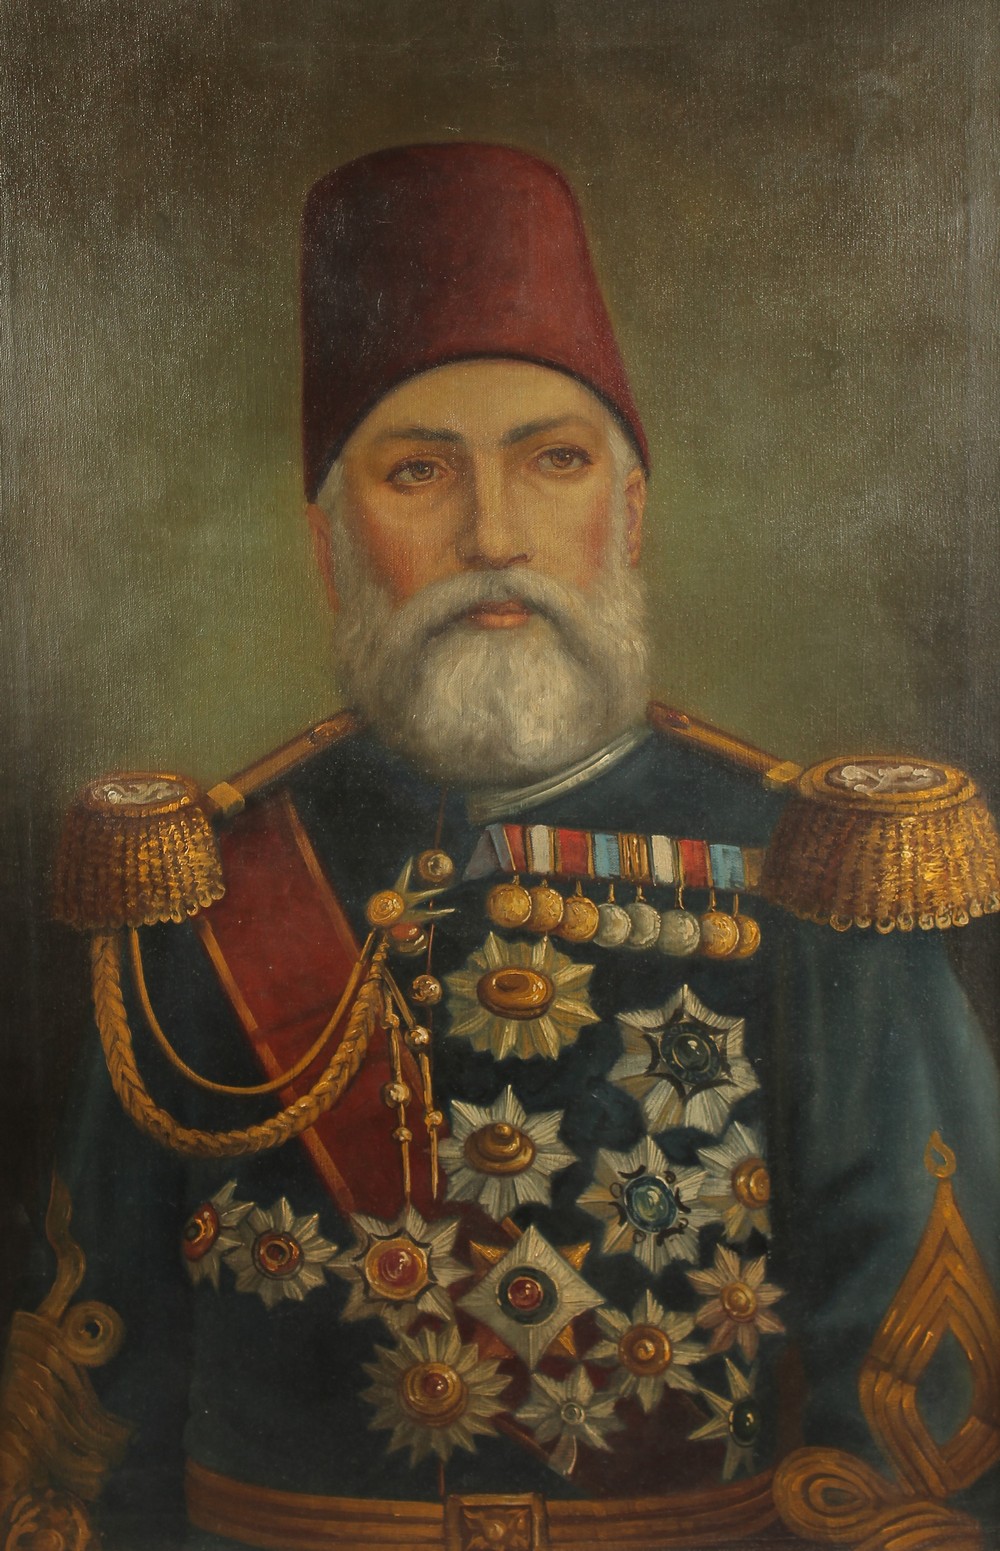 A LARGE OTTOMAN TURKISH PORTRAIT PAINTING OF MEHMED V RESAD: SULTAN OF THE OTTOMAN EMPIRE FROM - Image 2 of 3